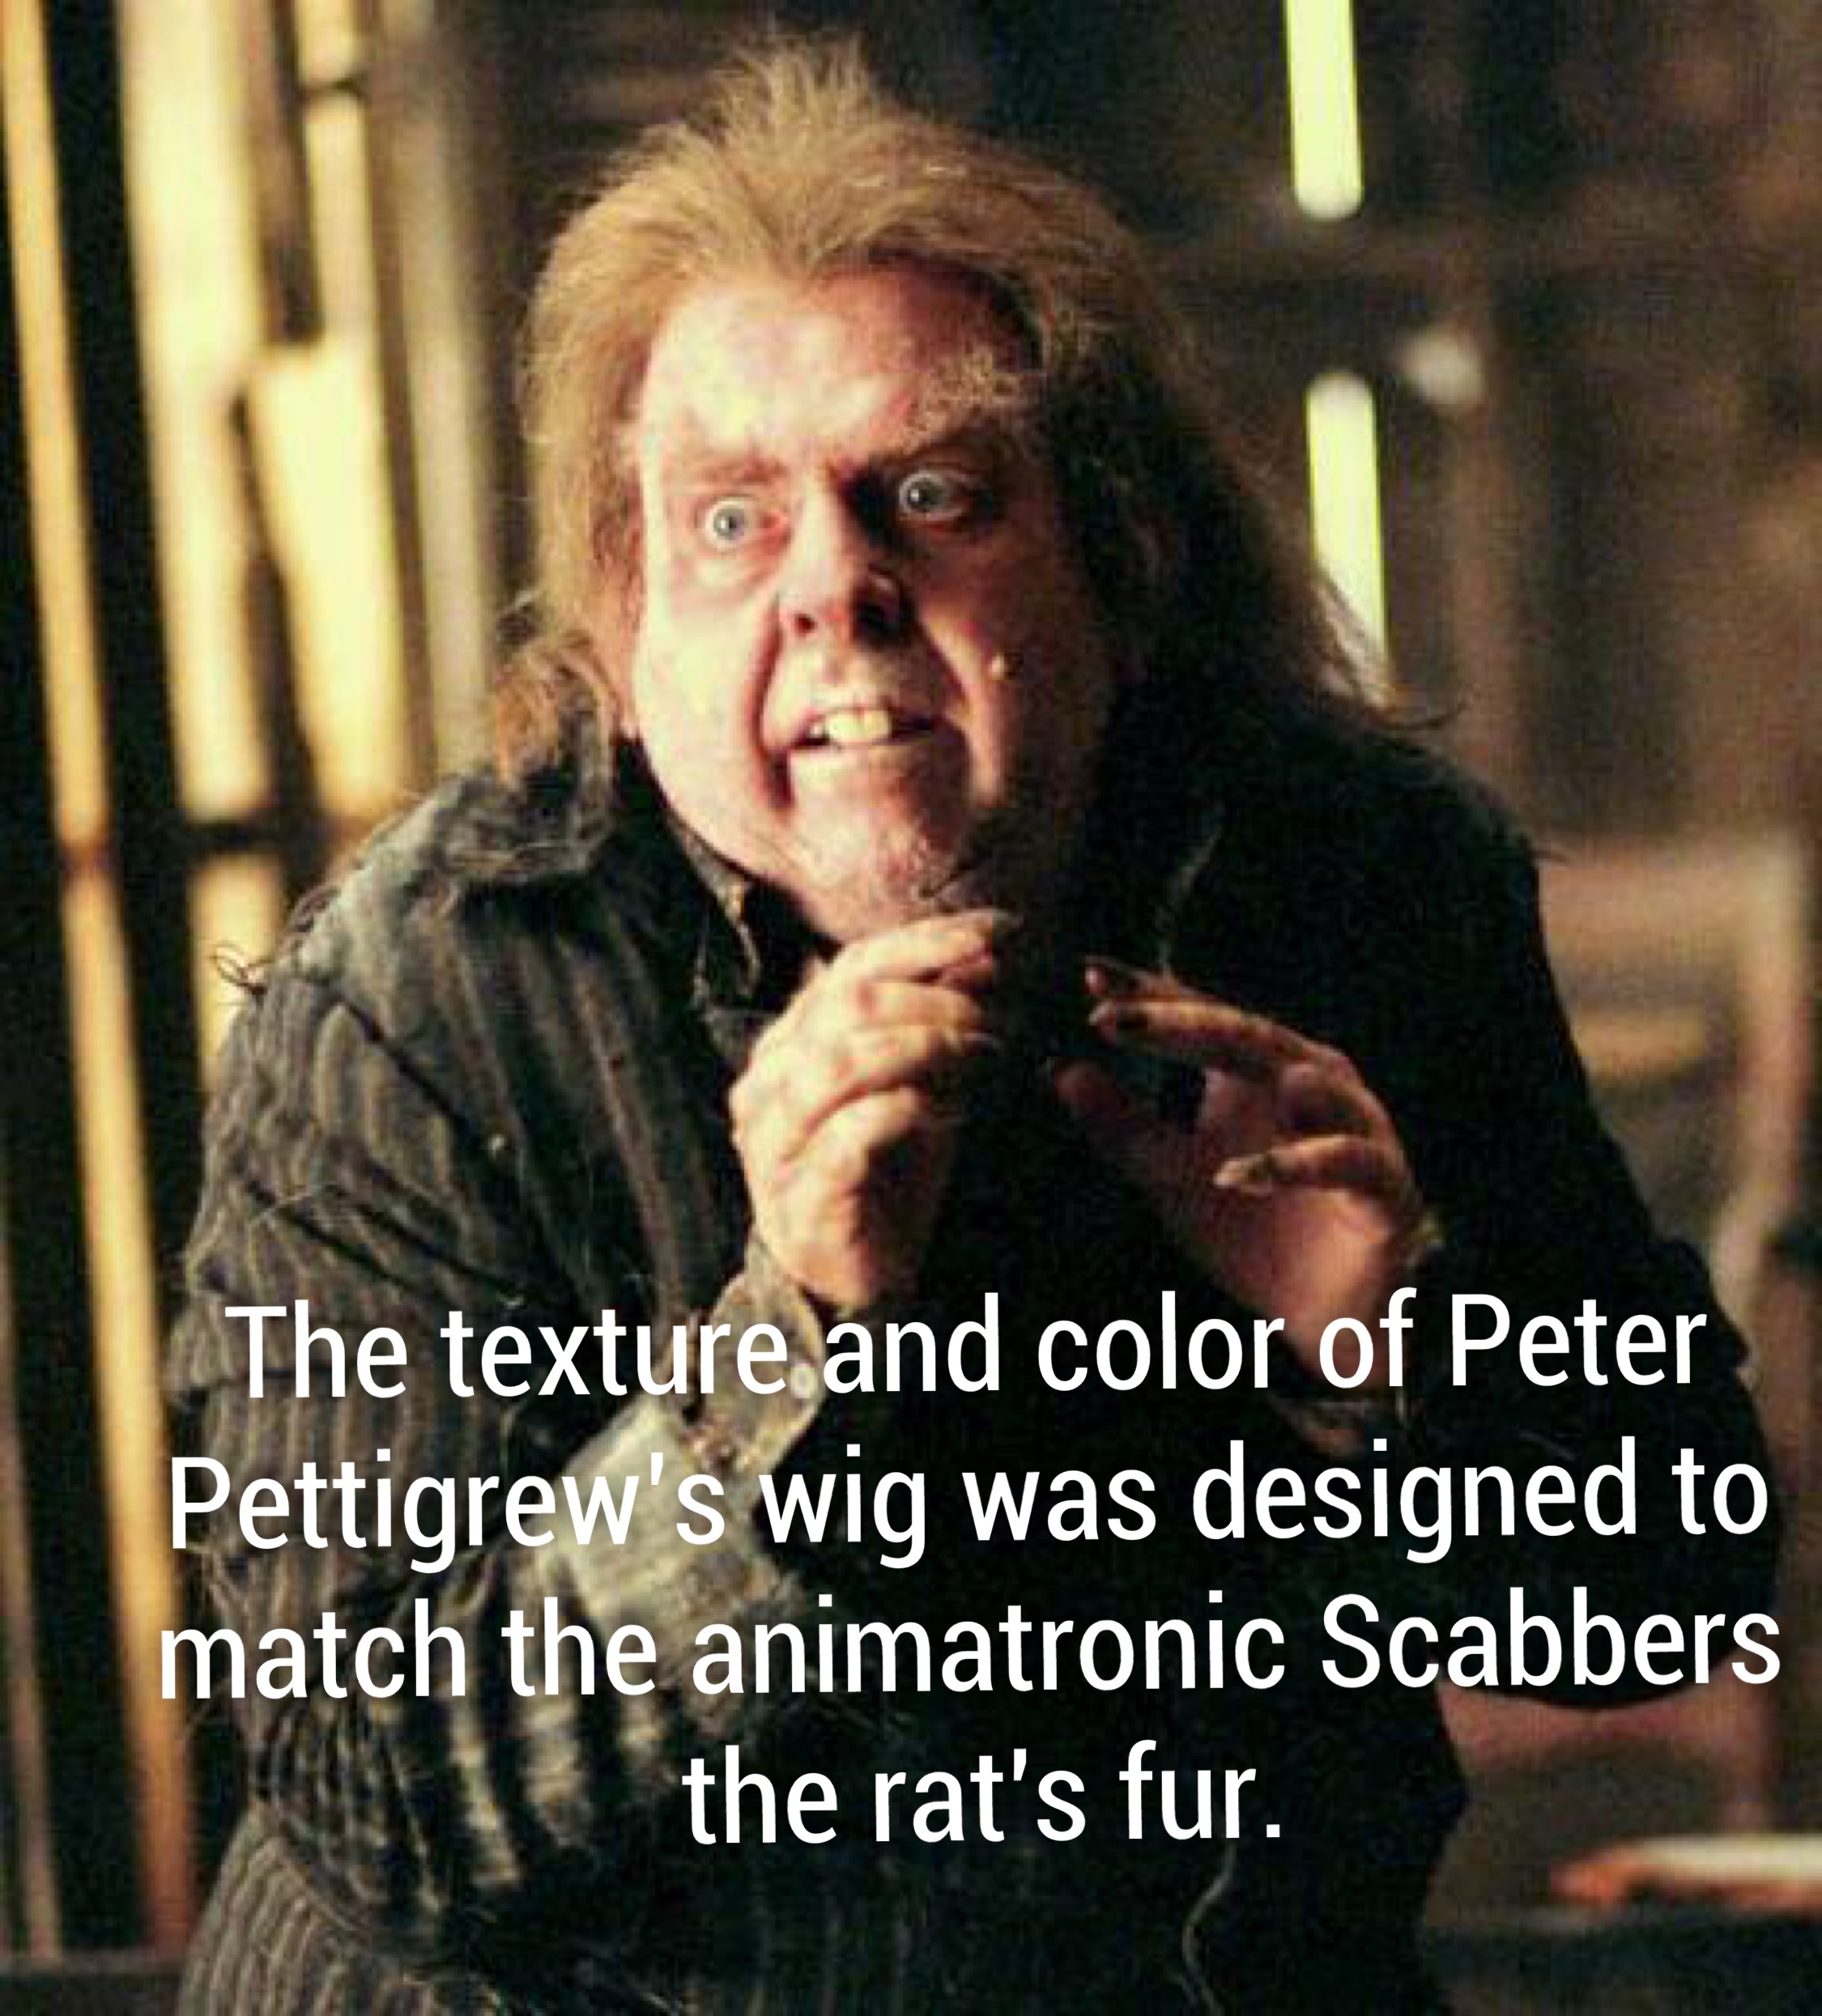 peter pettigrew harry potter - The texture and color of Peter Pettigrew's wig was designed to match the animatronic Scabbers the rat's fur.